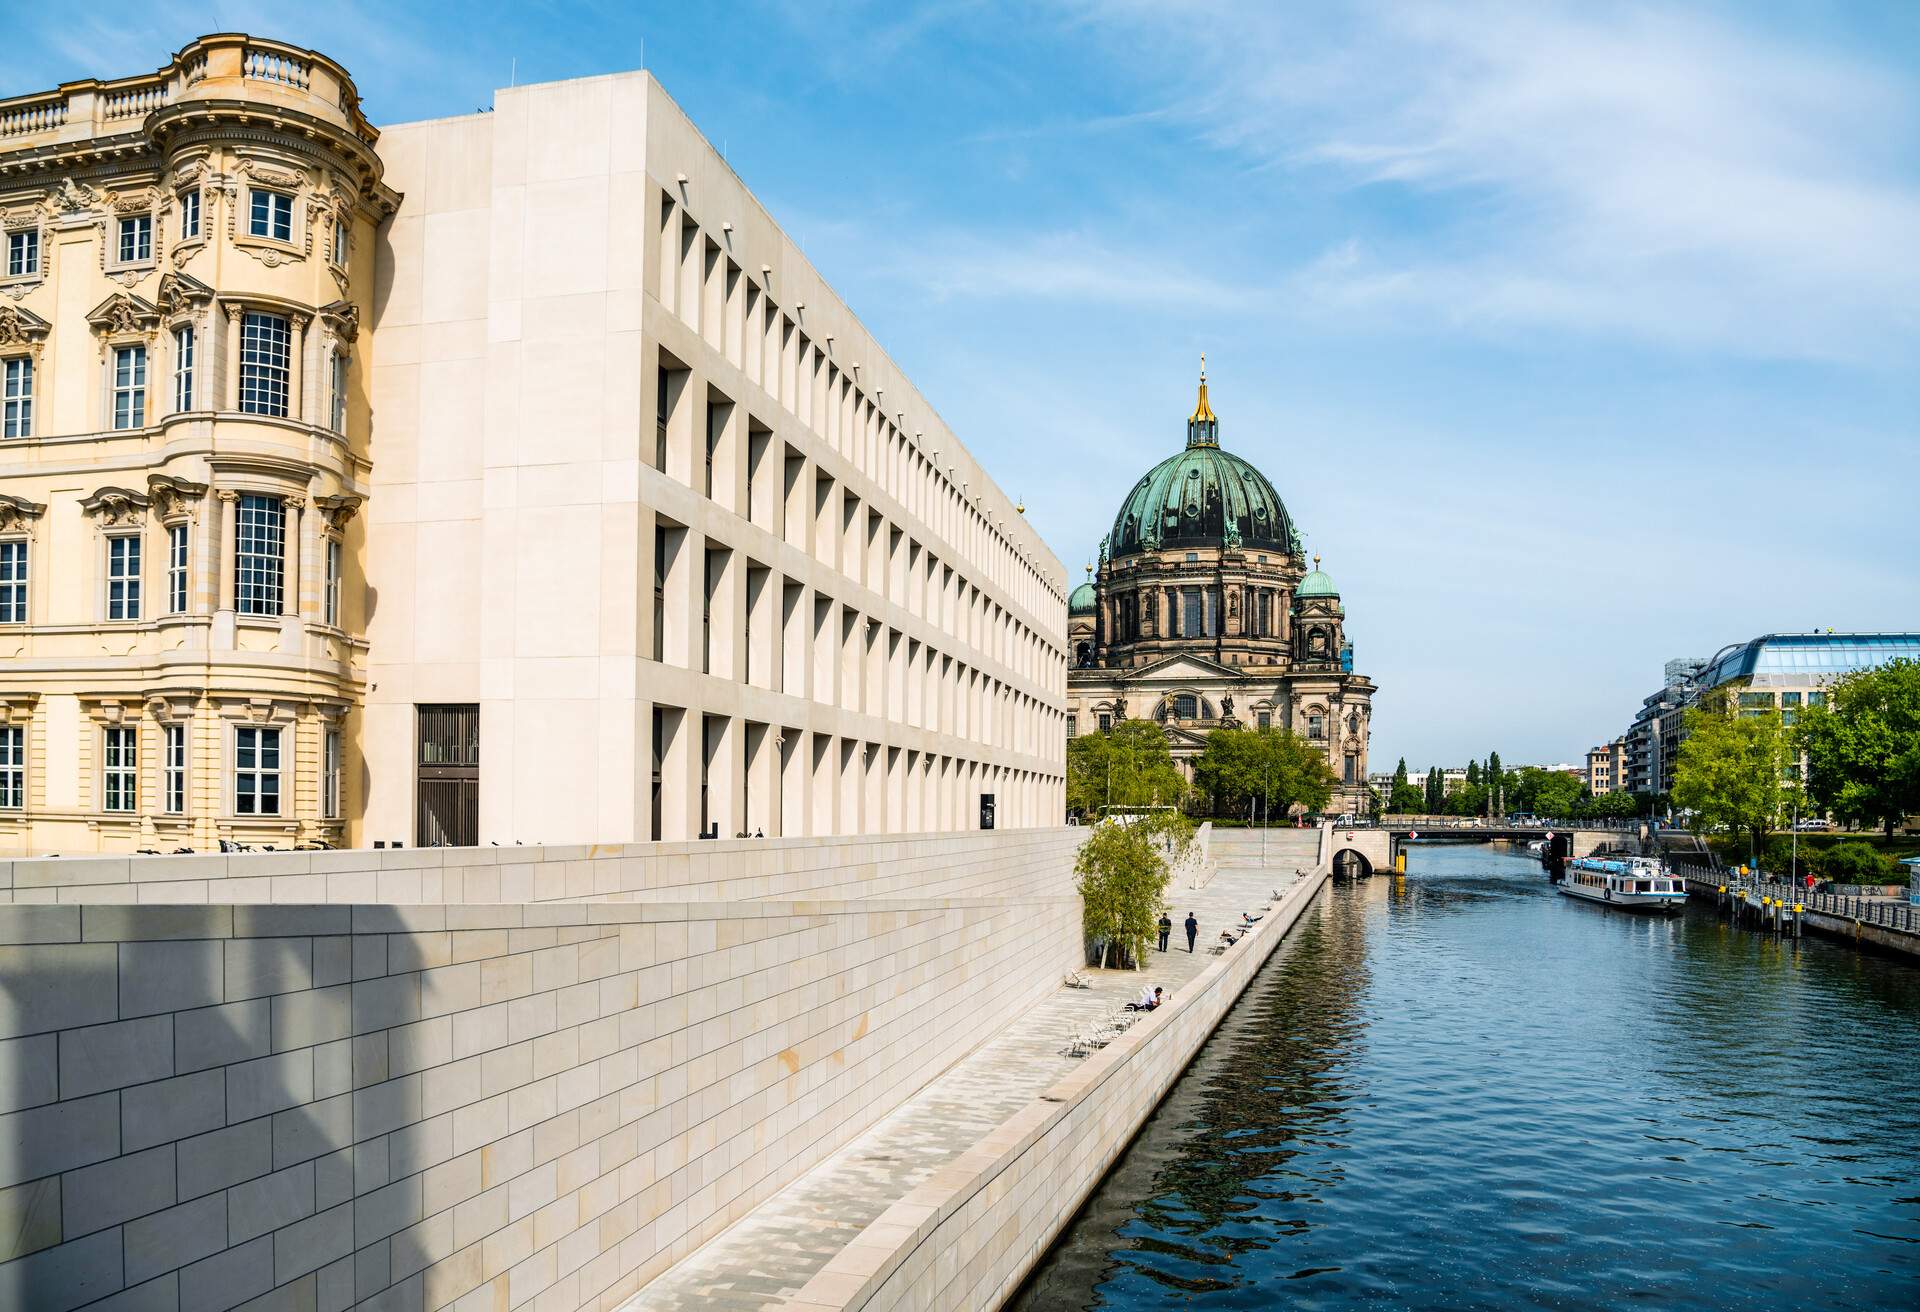 rebuilt City Palace and The Berliner Dom.Berlin, Germany